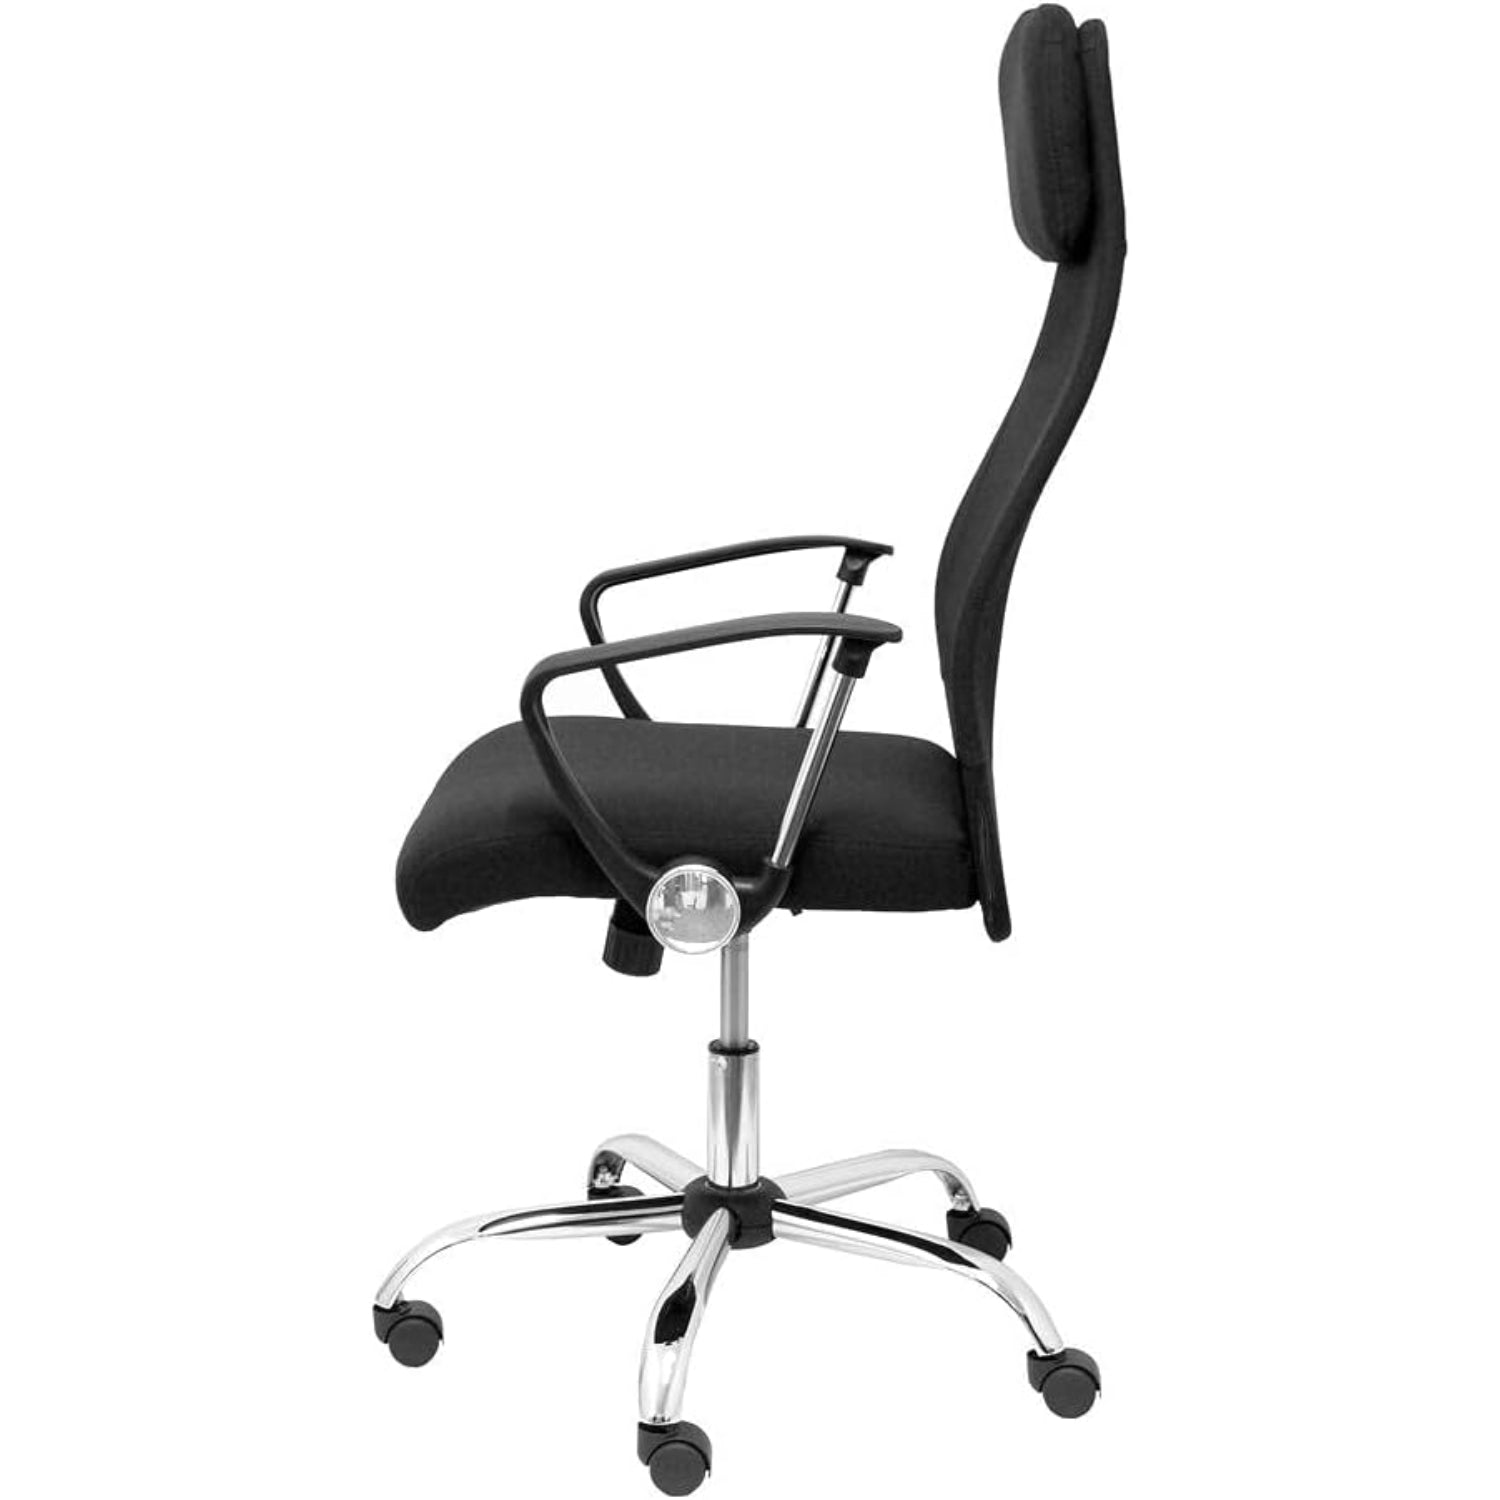 clio office chair in black showcasing a chrome base and arms.